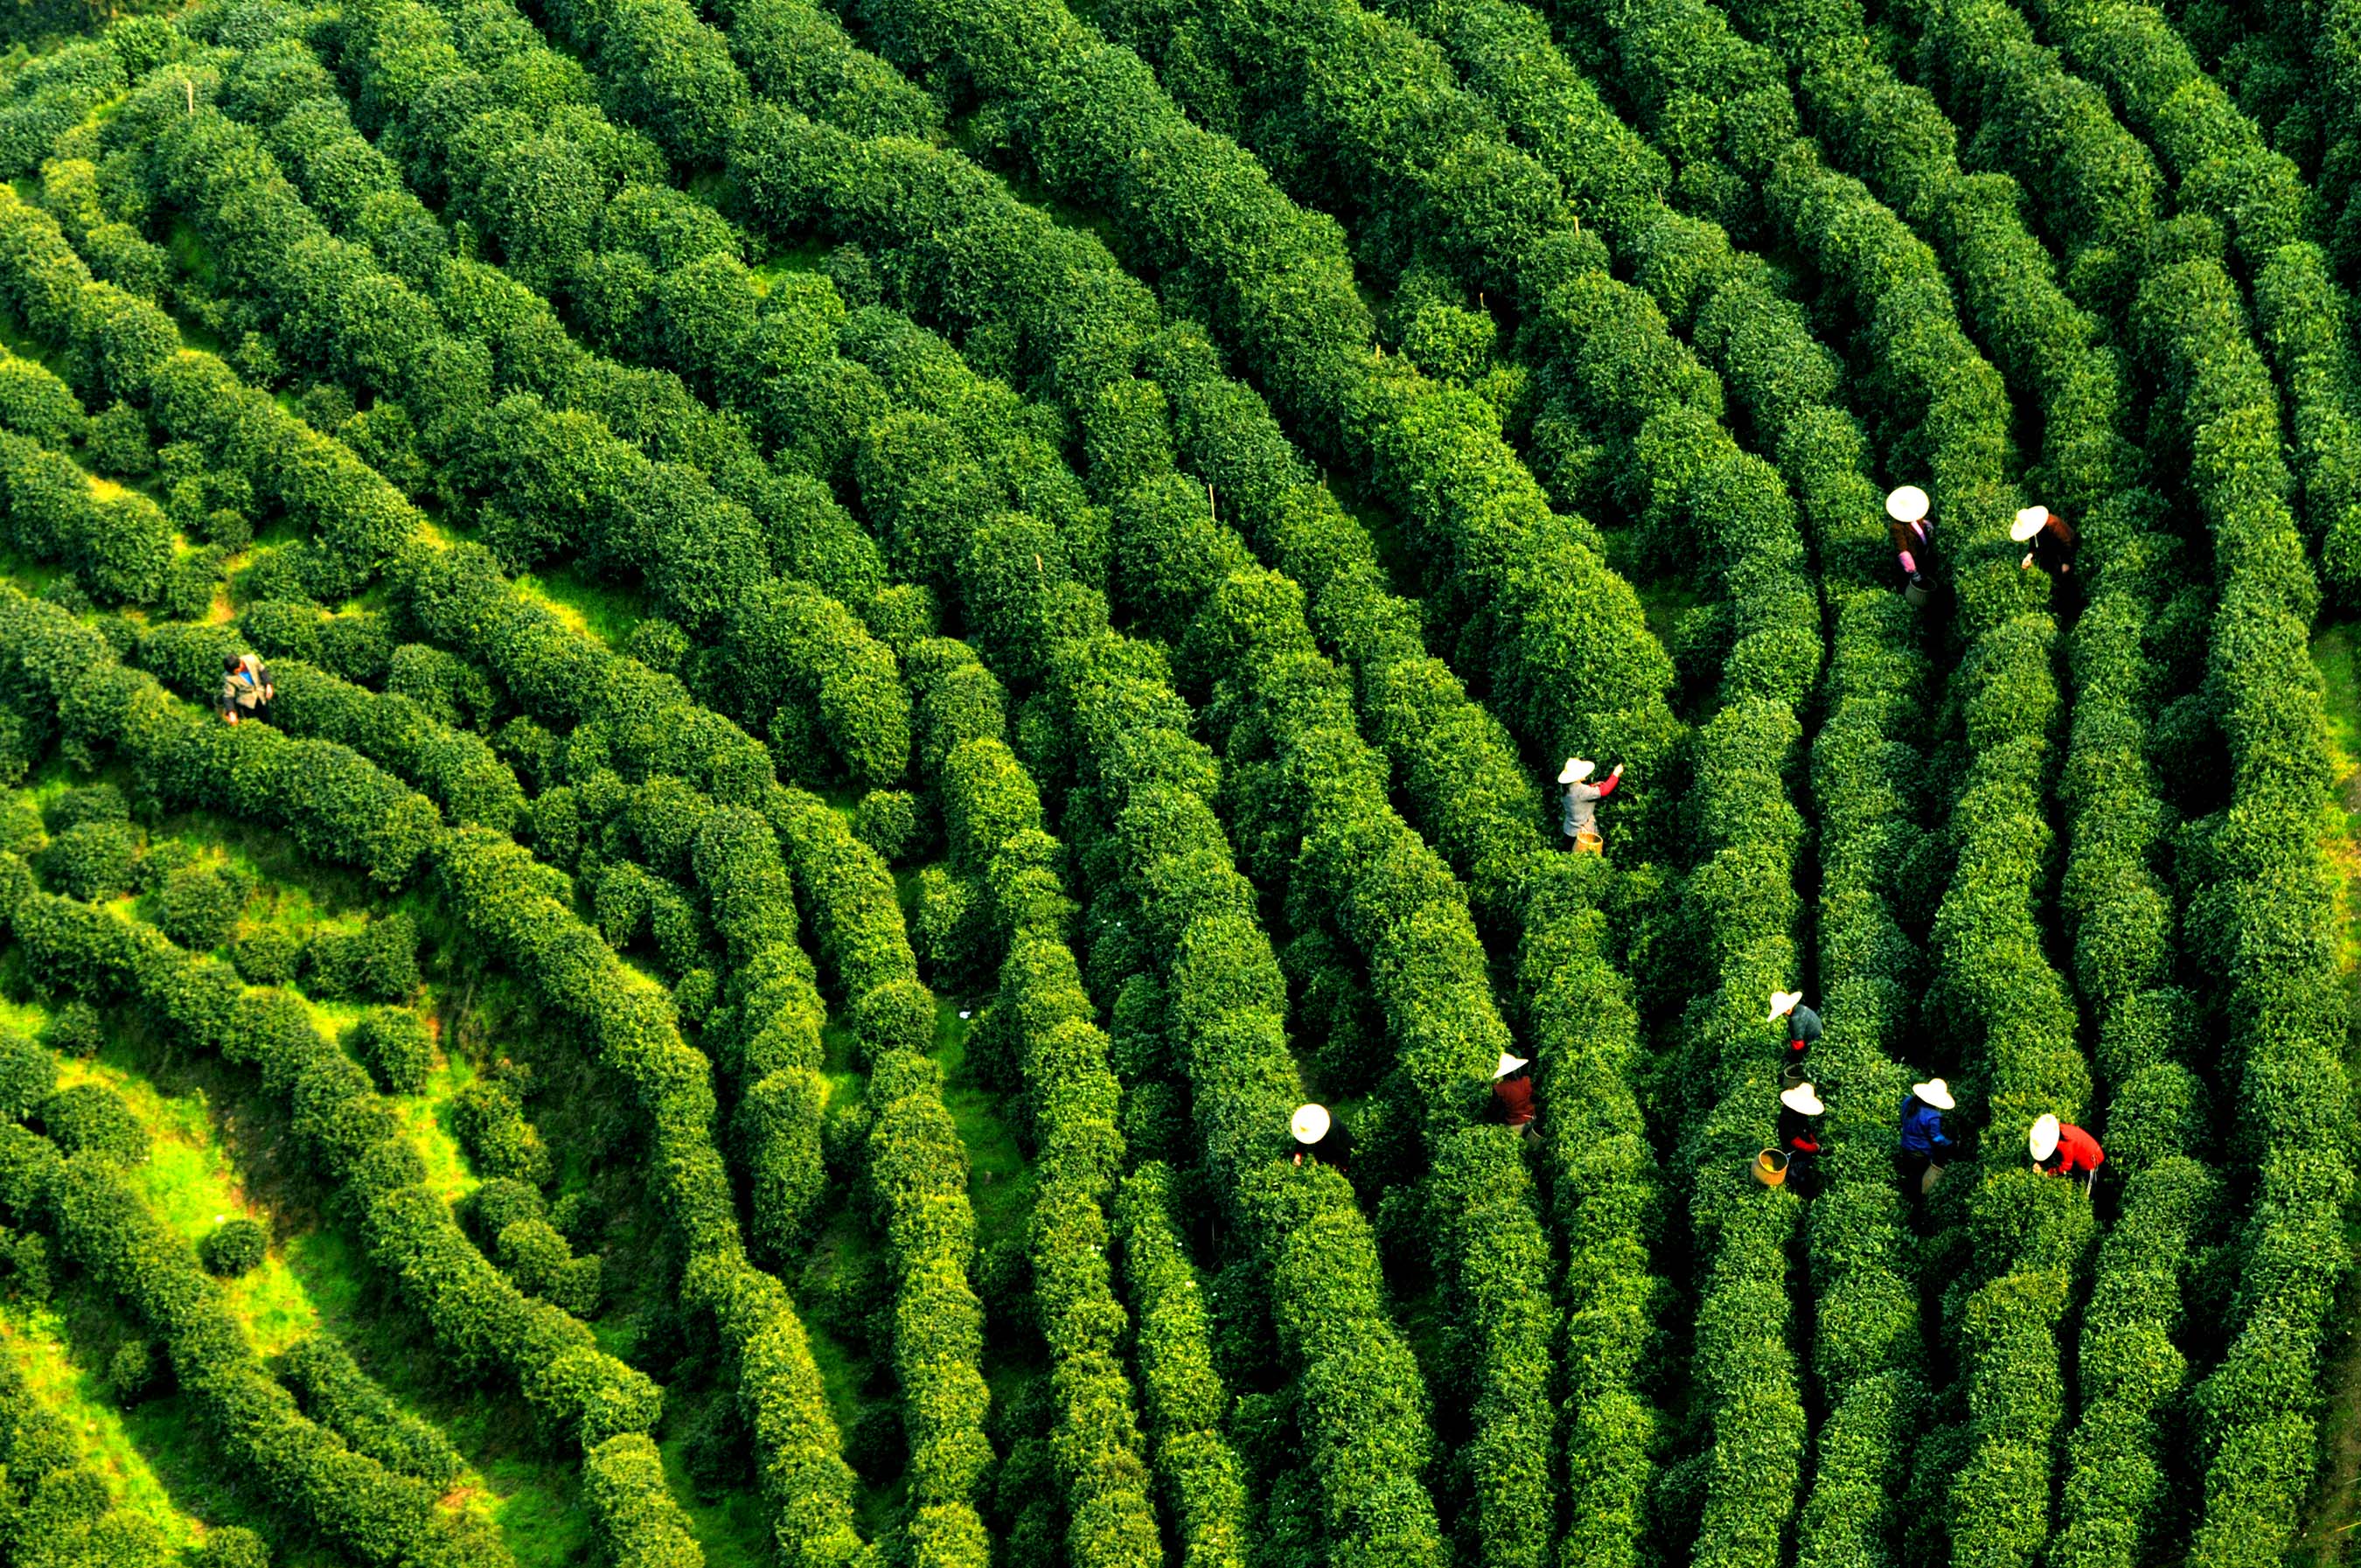 Dragon Well Field, where the best known green tea in China is harvested